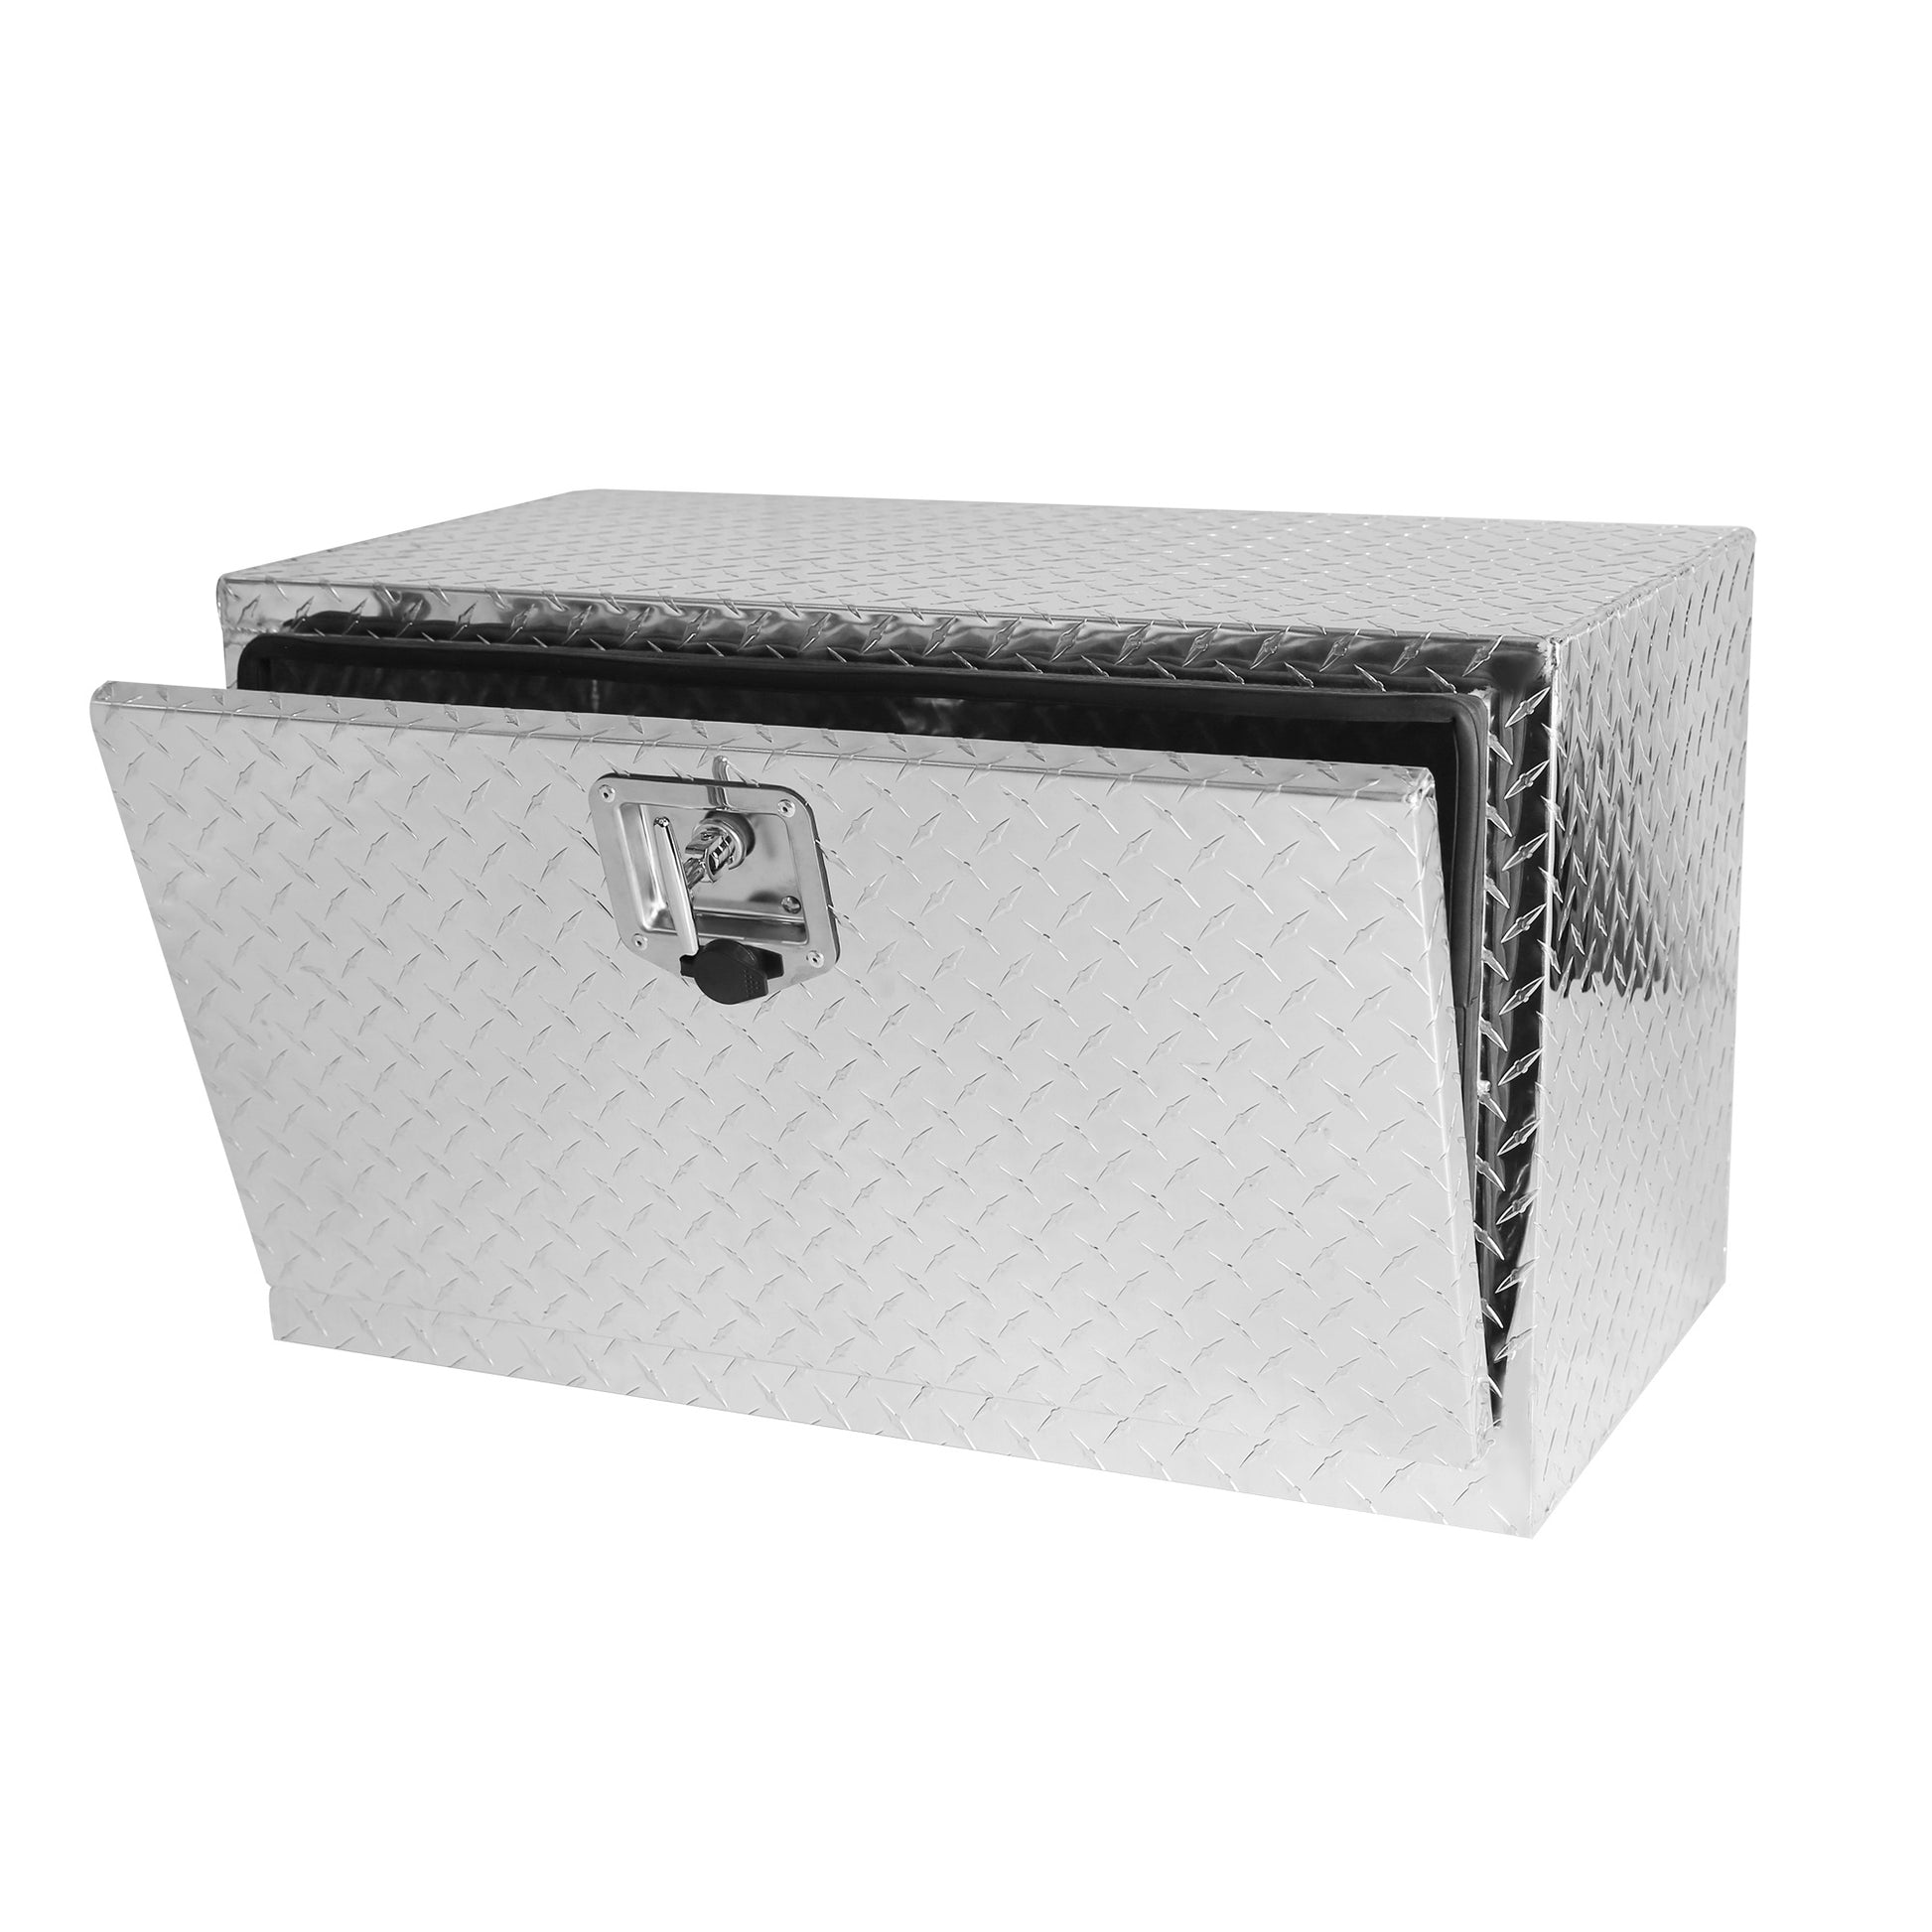 30 Inch Aluminum Stripes Plated Tool Box Pick Up Truck silver-aluminum